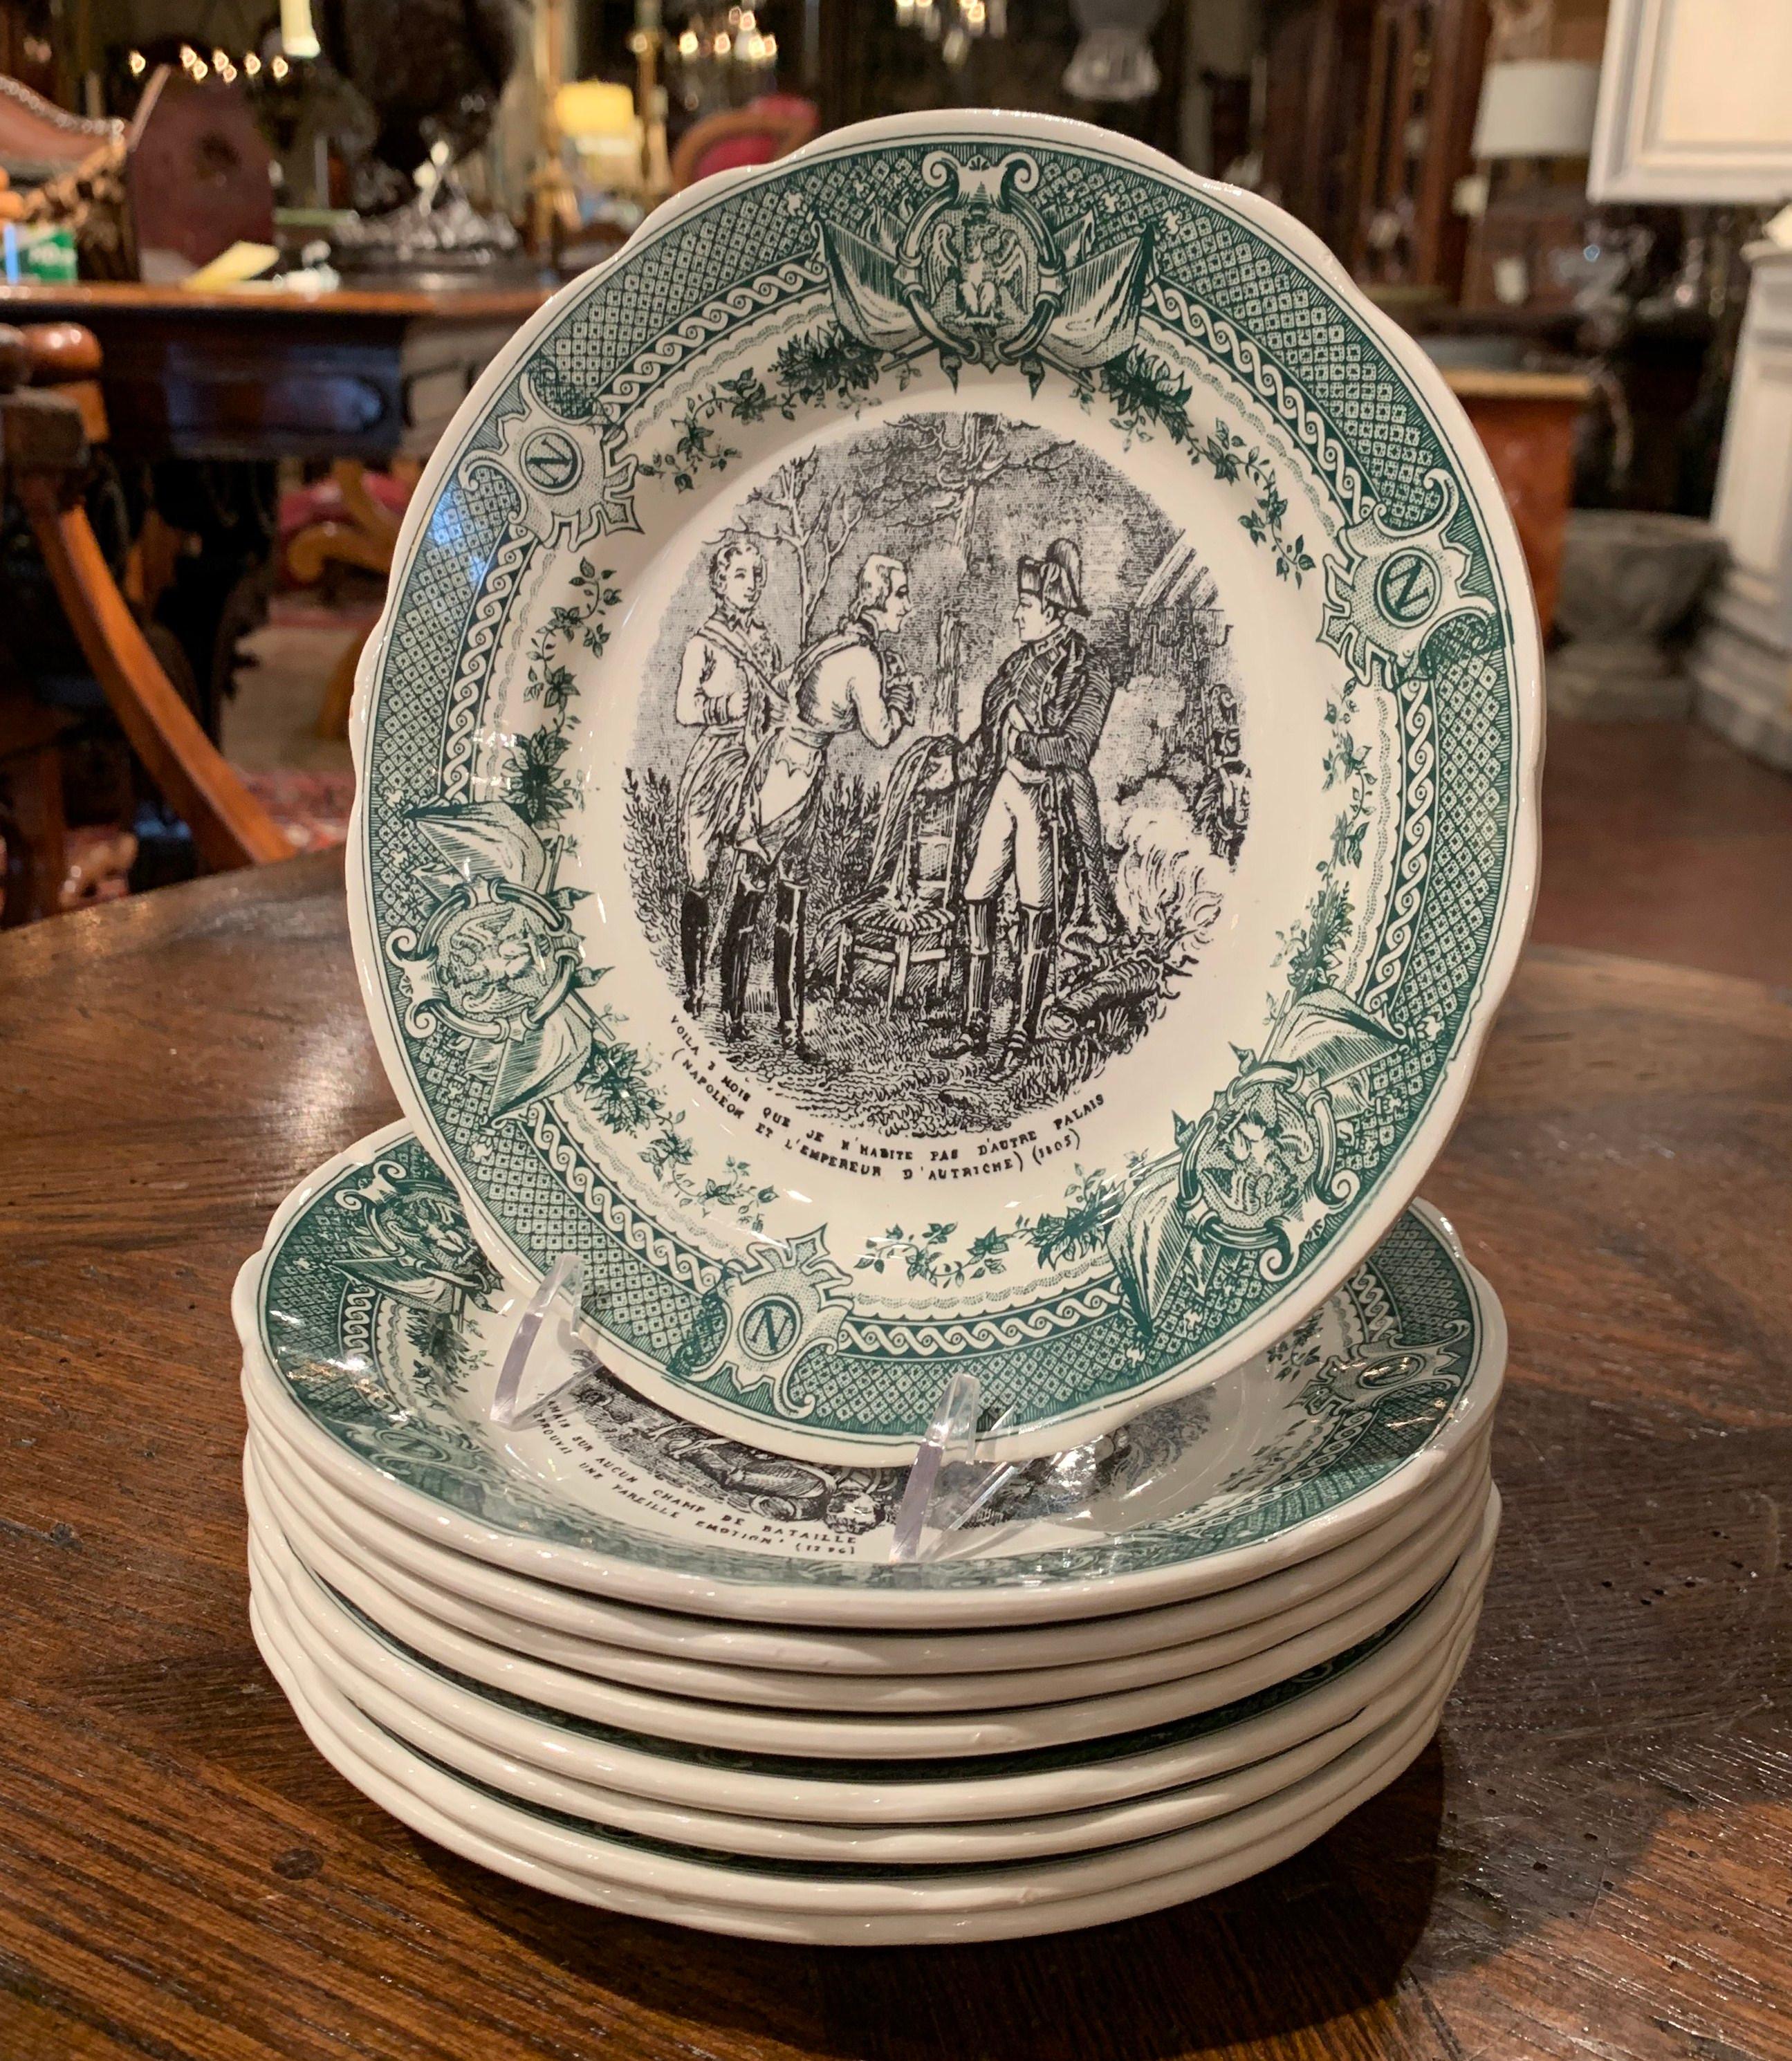 Use this elegant set of eight antique plates to serve appetizer or desert to your guests! Crafted in Sarreguemines, France, circa 1950, each hand painted ceramic plate features the Emperor Napoleon Bonaparte with an illustrated scene and one of his